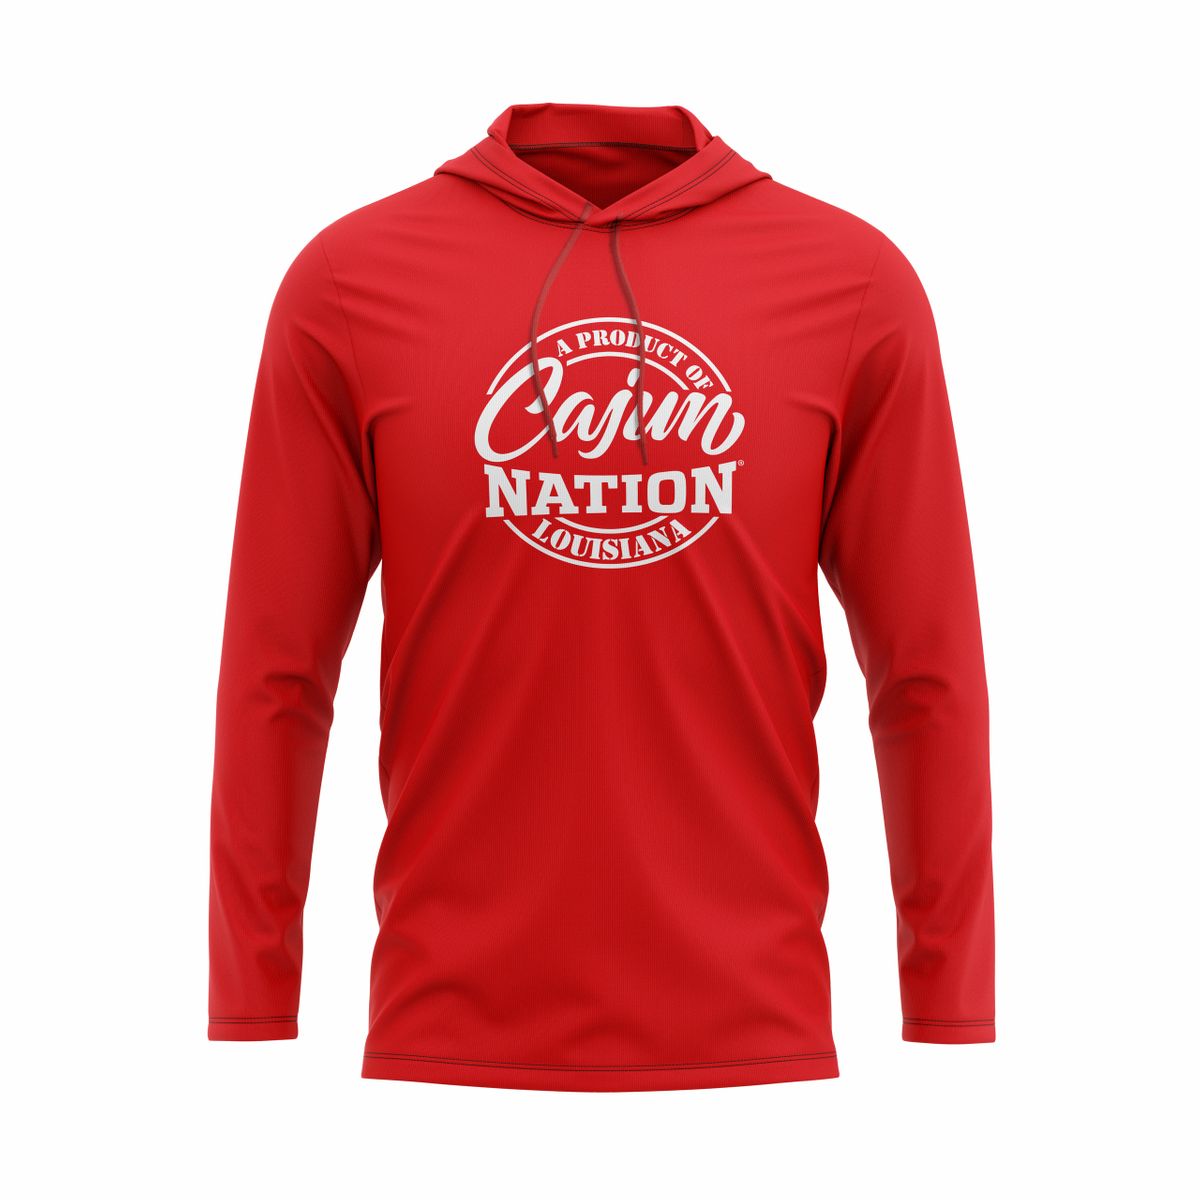 Cajun Nation Red Lightweight Pullover Hoodie - 4.3 oz., 100% combed ring spun cotton, 32 singles Heather colors are 65/35 polyester/ringspun cotton Relaxed unlined hood with contrast drawcord Double-needle neck, sleeve and bottom hem Tubular construction Plastisol print